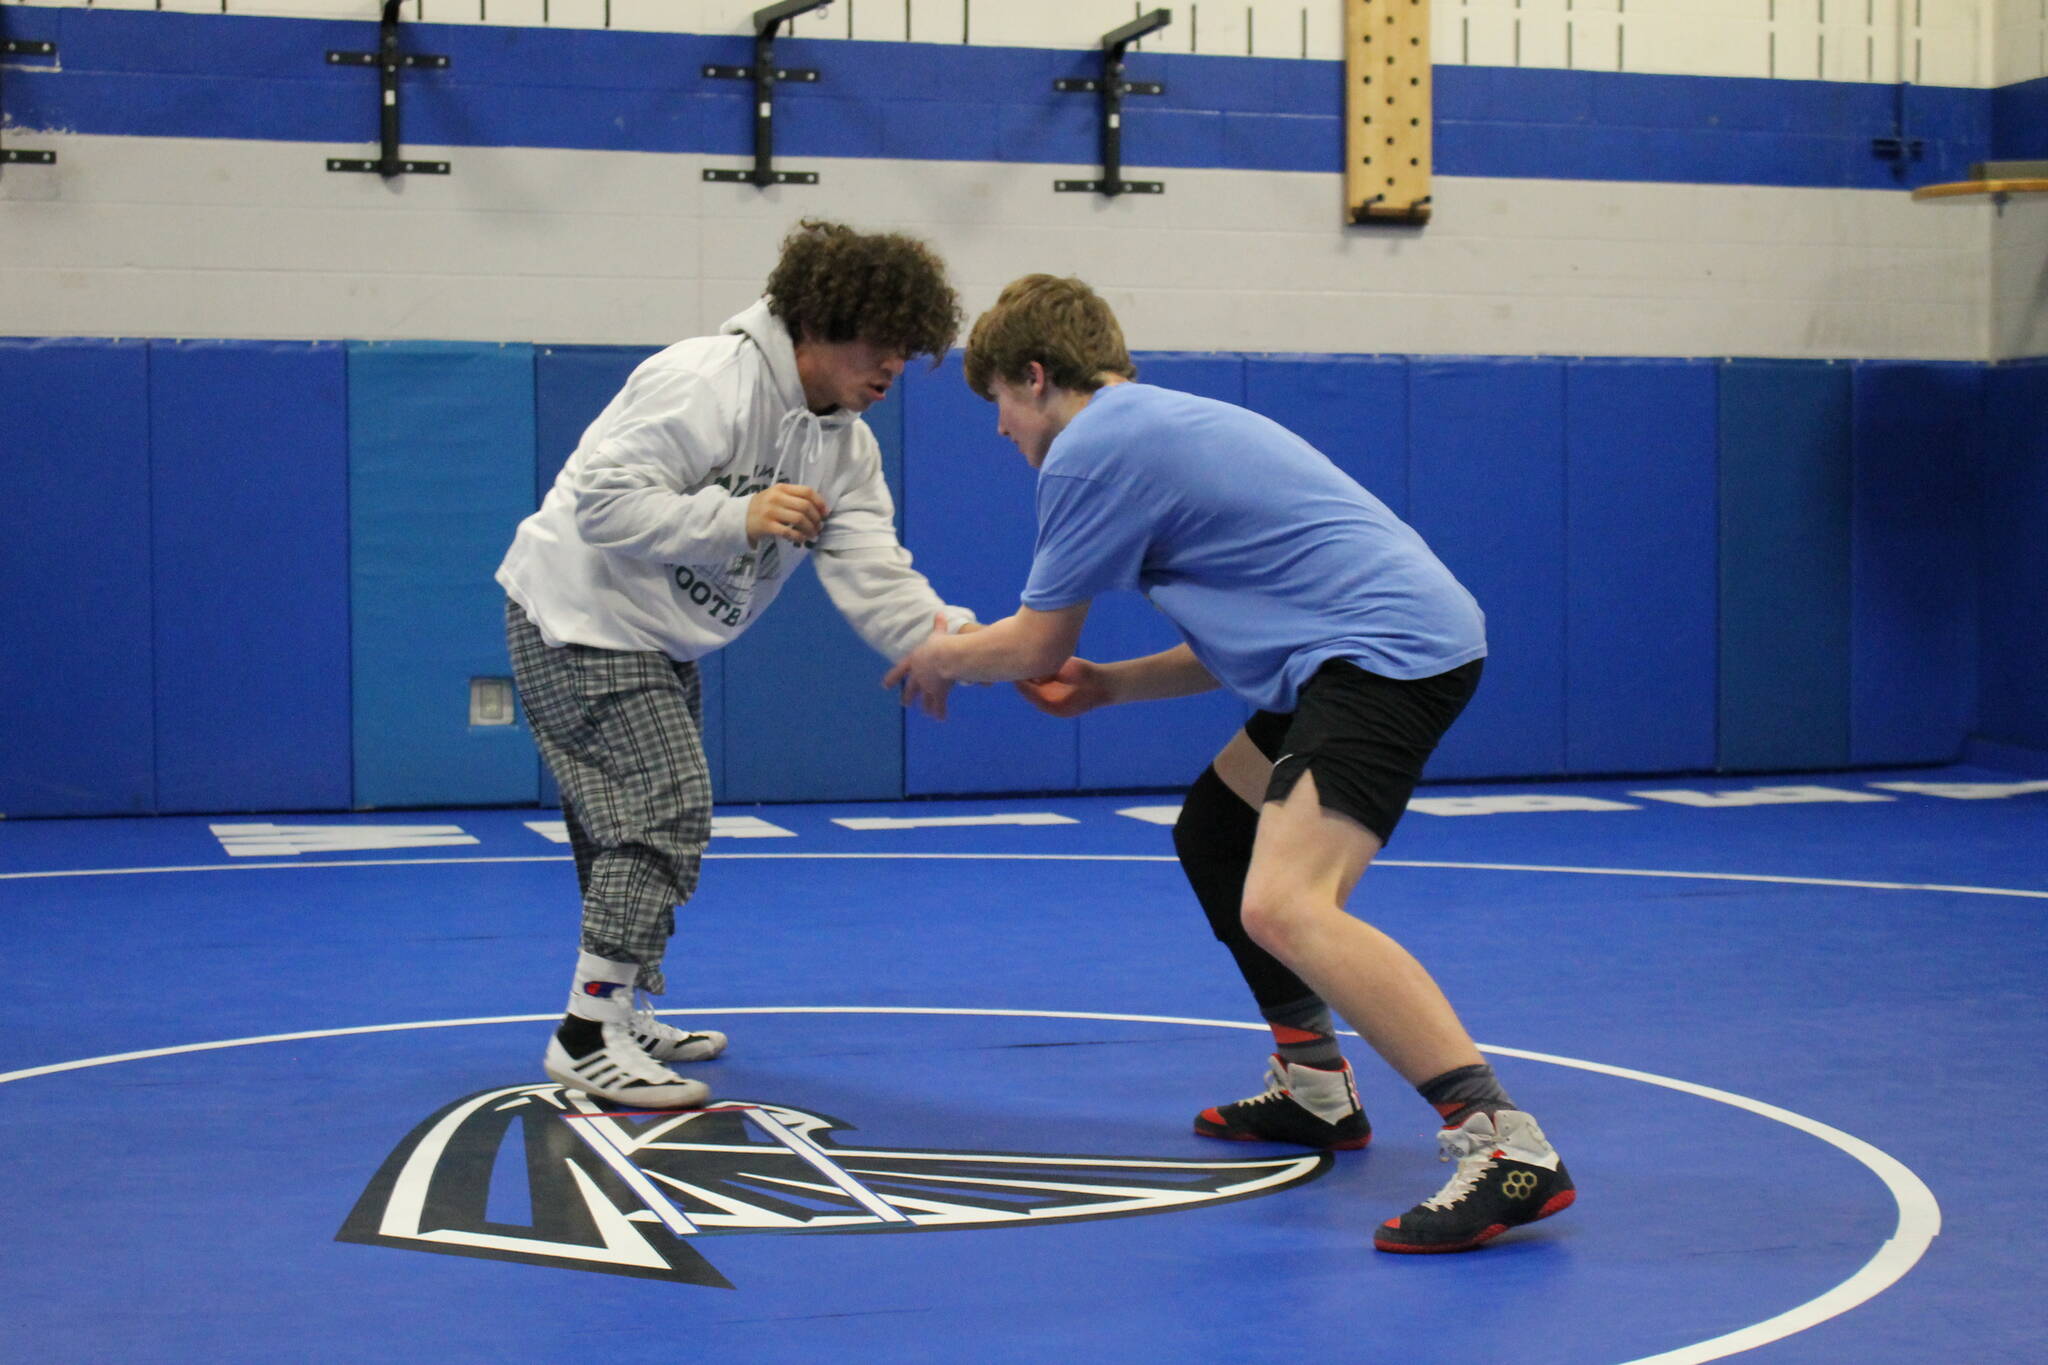 Photo by Kira Erickson/South Whidbey Record
Sophomore Smokey McClure, left, wrestles sophomore Cole Thoreson during a recent practice at South Whidbey High School. The boys are headed to the statewide competition this weekend after placing in the regional tournament.